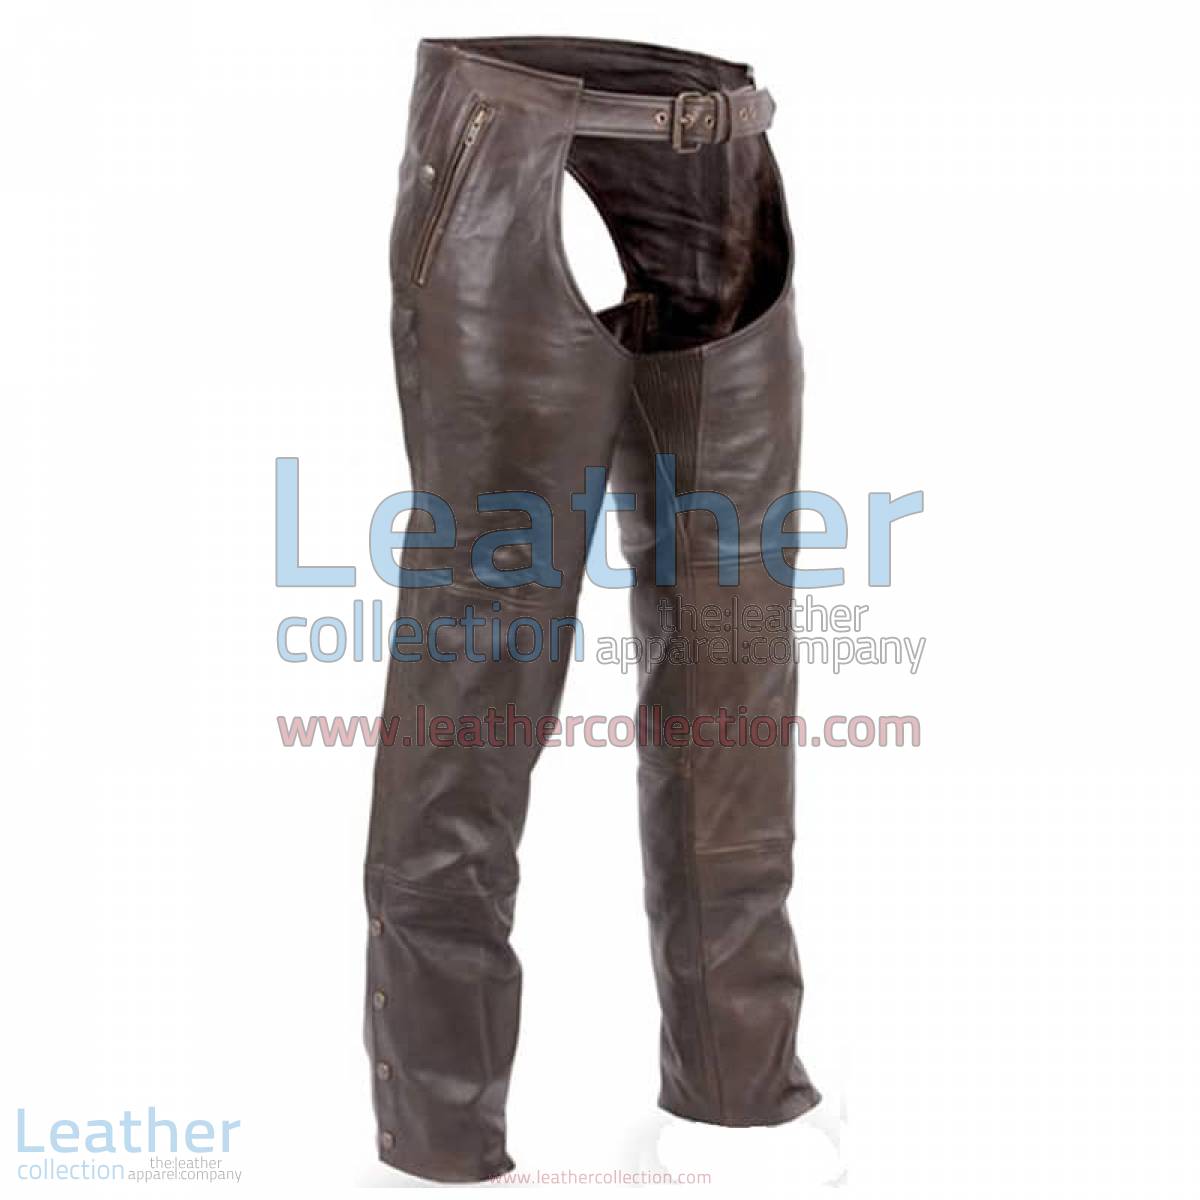 Premium Brown Leather Motorcycle Chaps